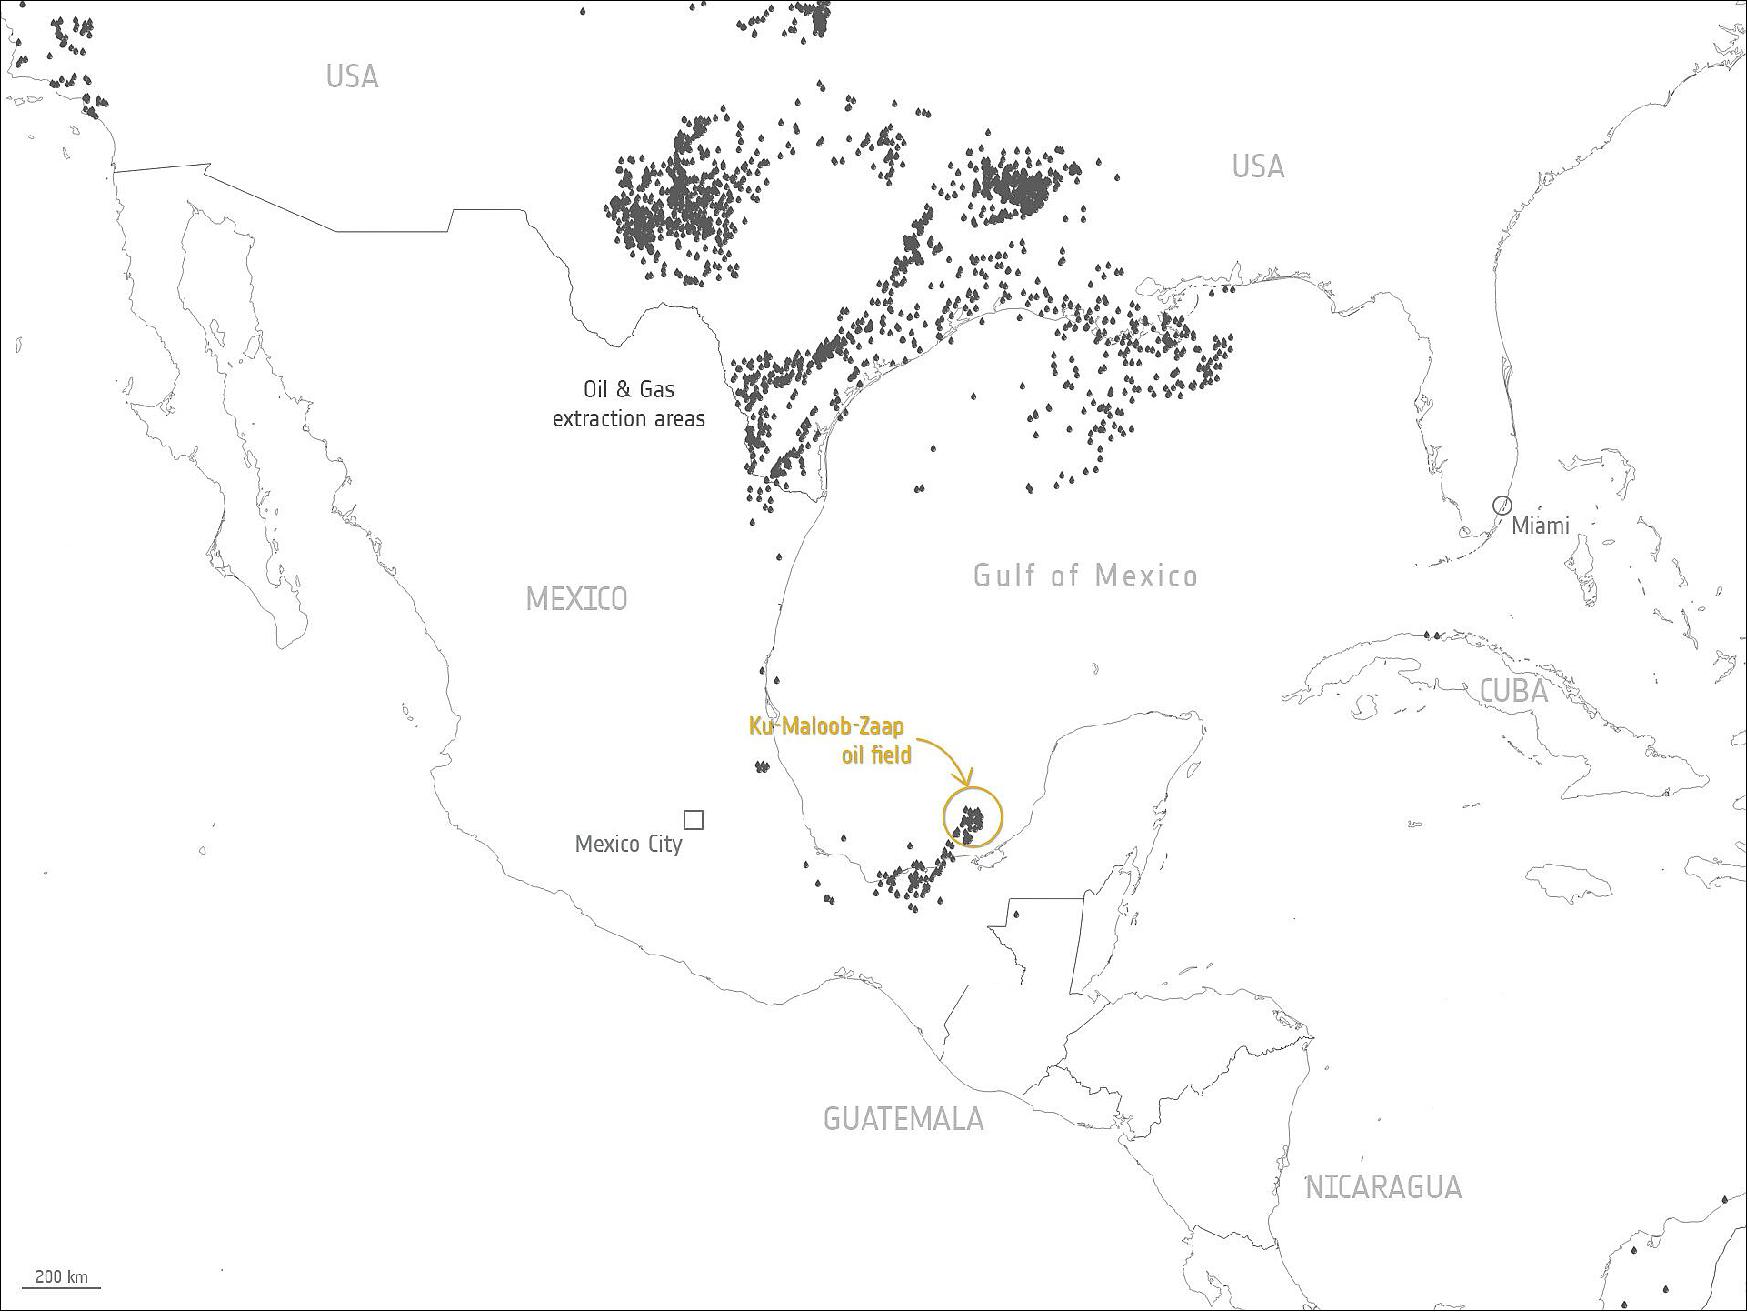 map shows the oil and gas extraction areas in and around the Gulf of Mexico